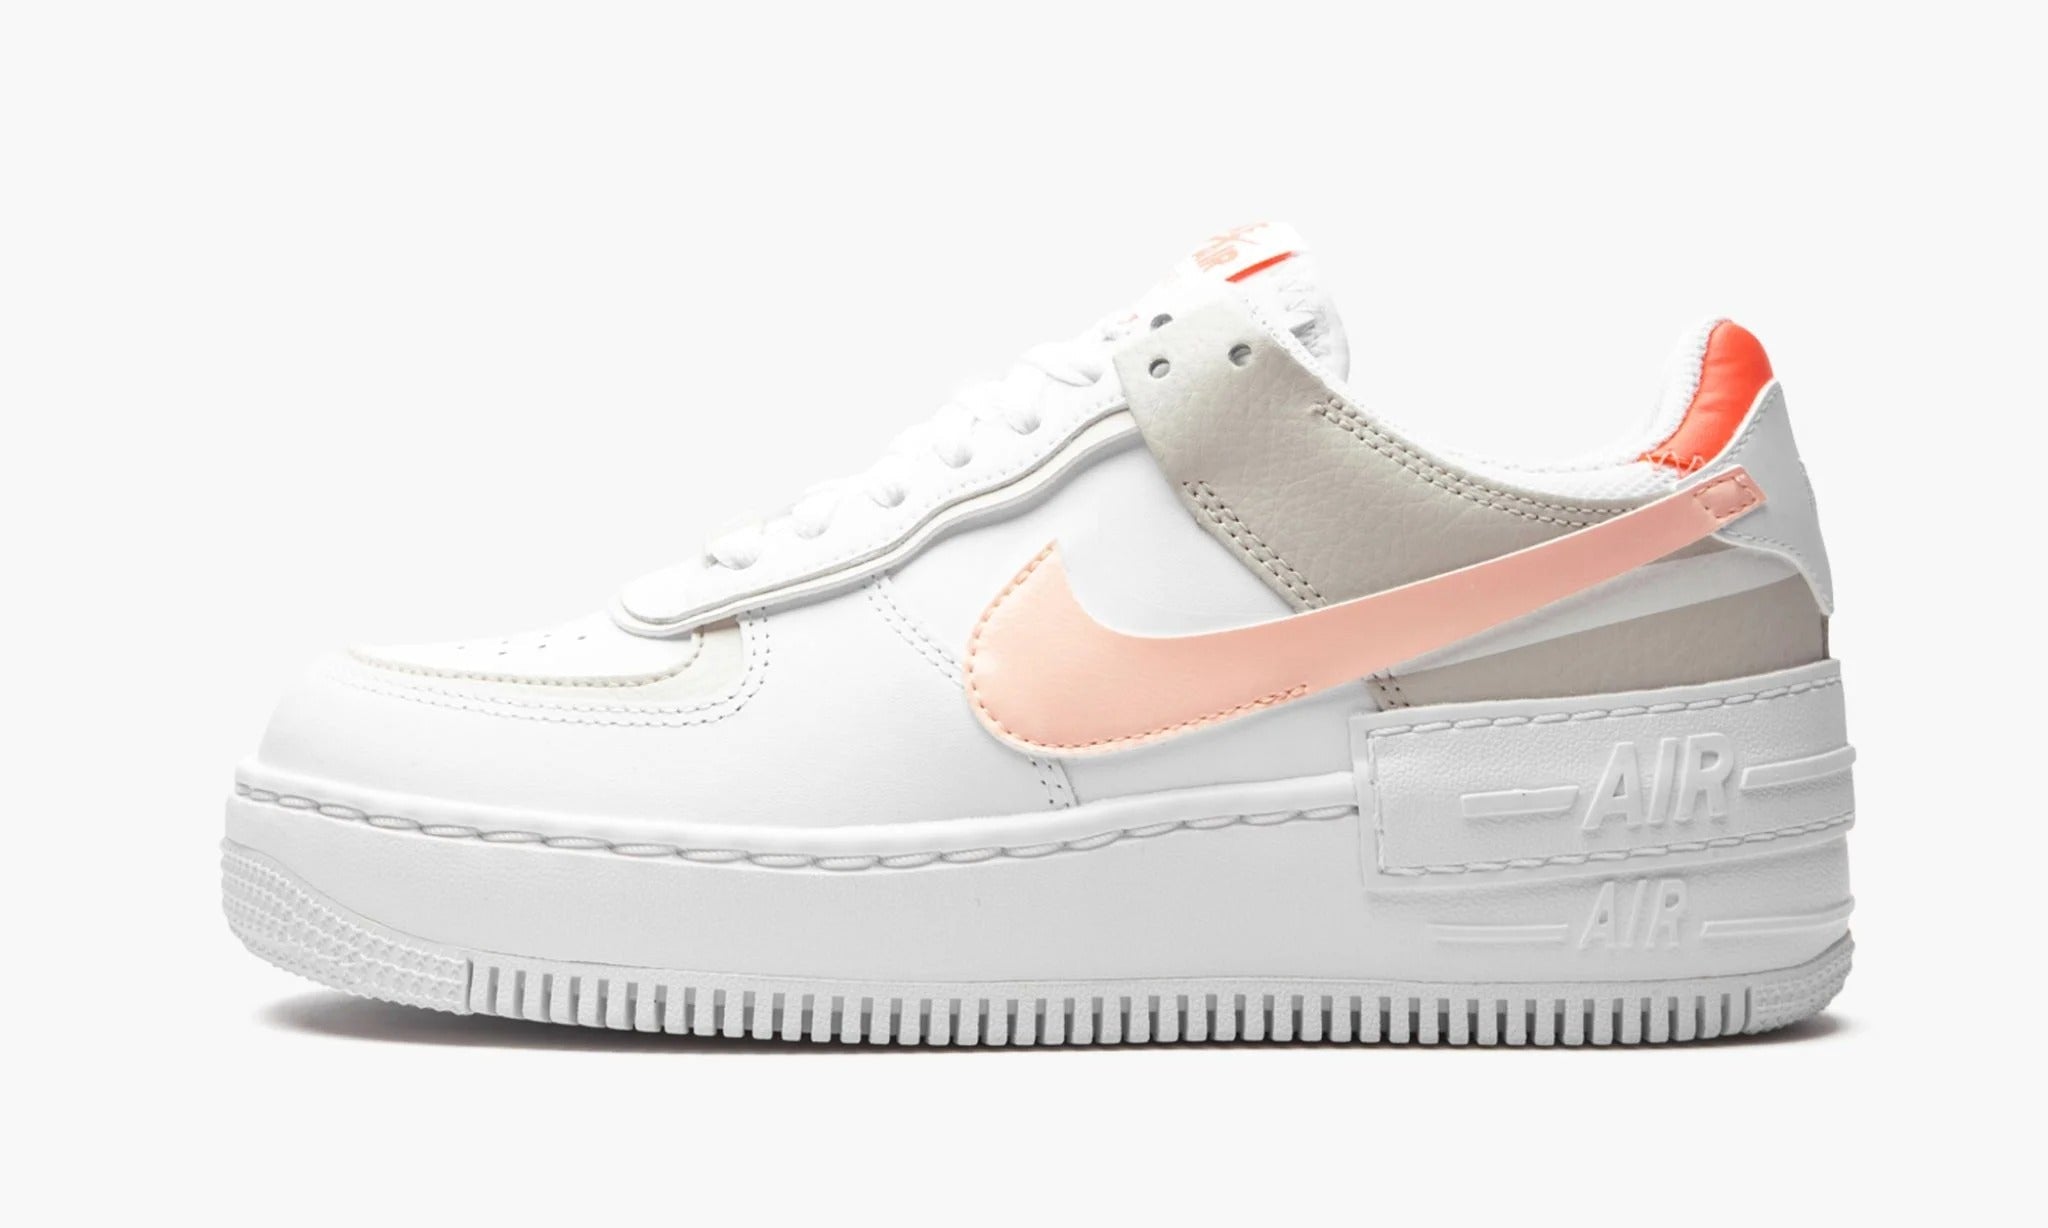 Nike air force 1 low shadow. Nike Air Force 1 Shadow. Nike Air Force 1 Low Shadow Spruce Aura. Nike Air Force 1 Low Shadow "citron Tint кроссовки.